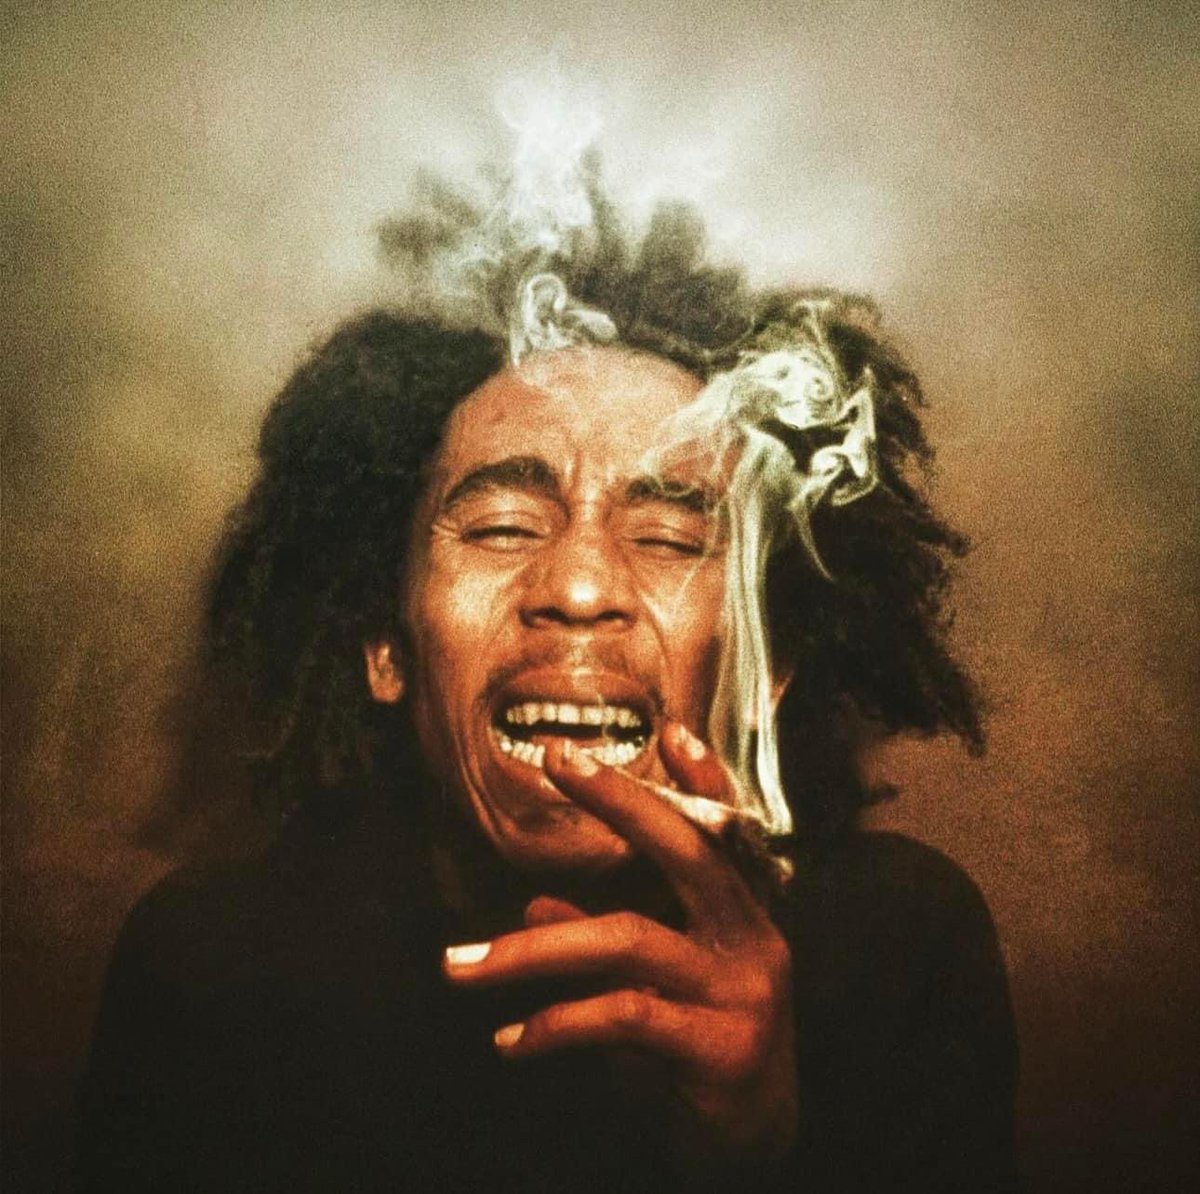 What’s your favorite Bob Marley song? 🌿